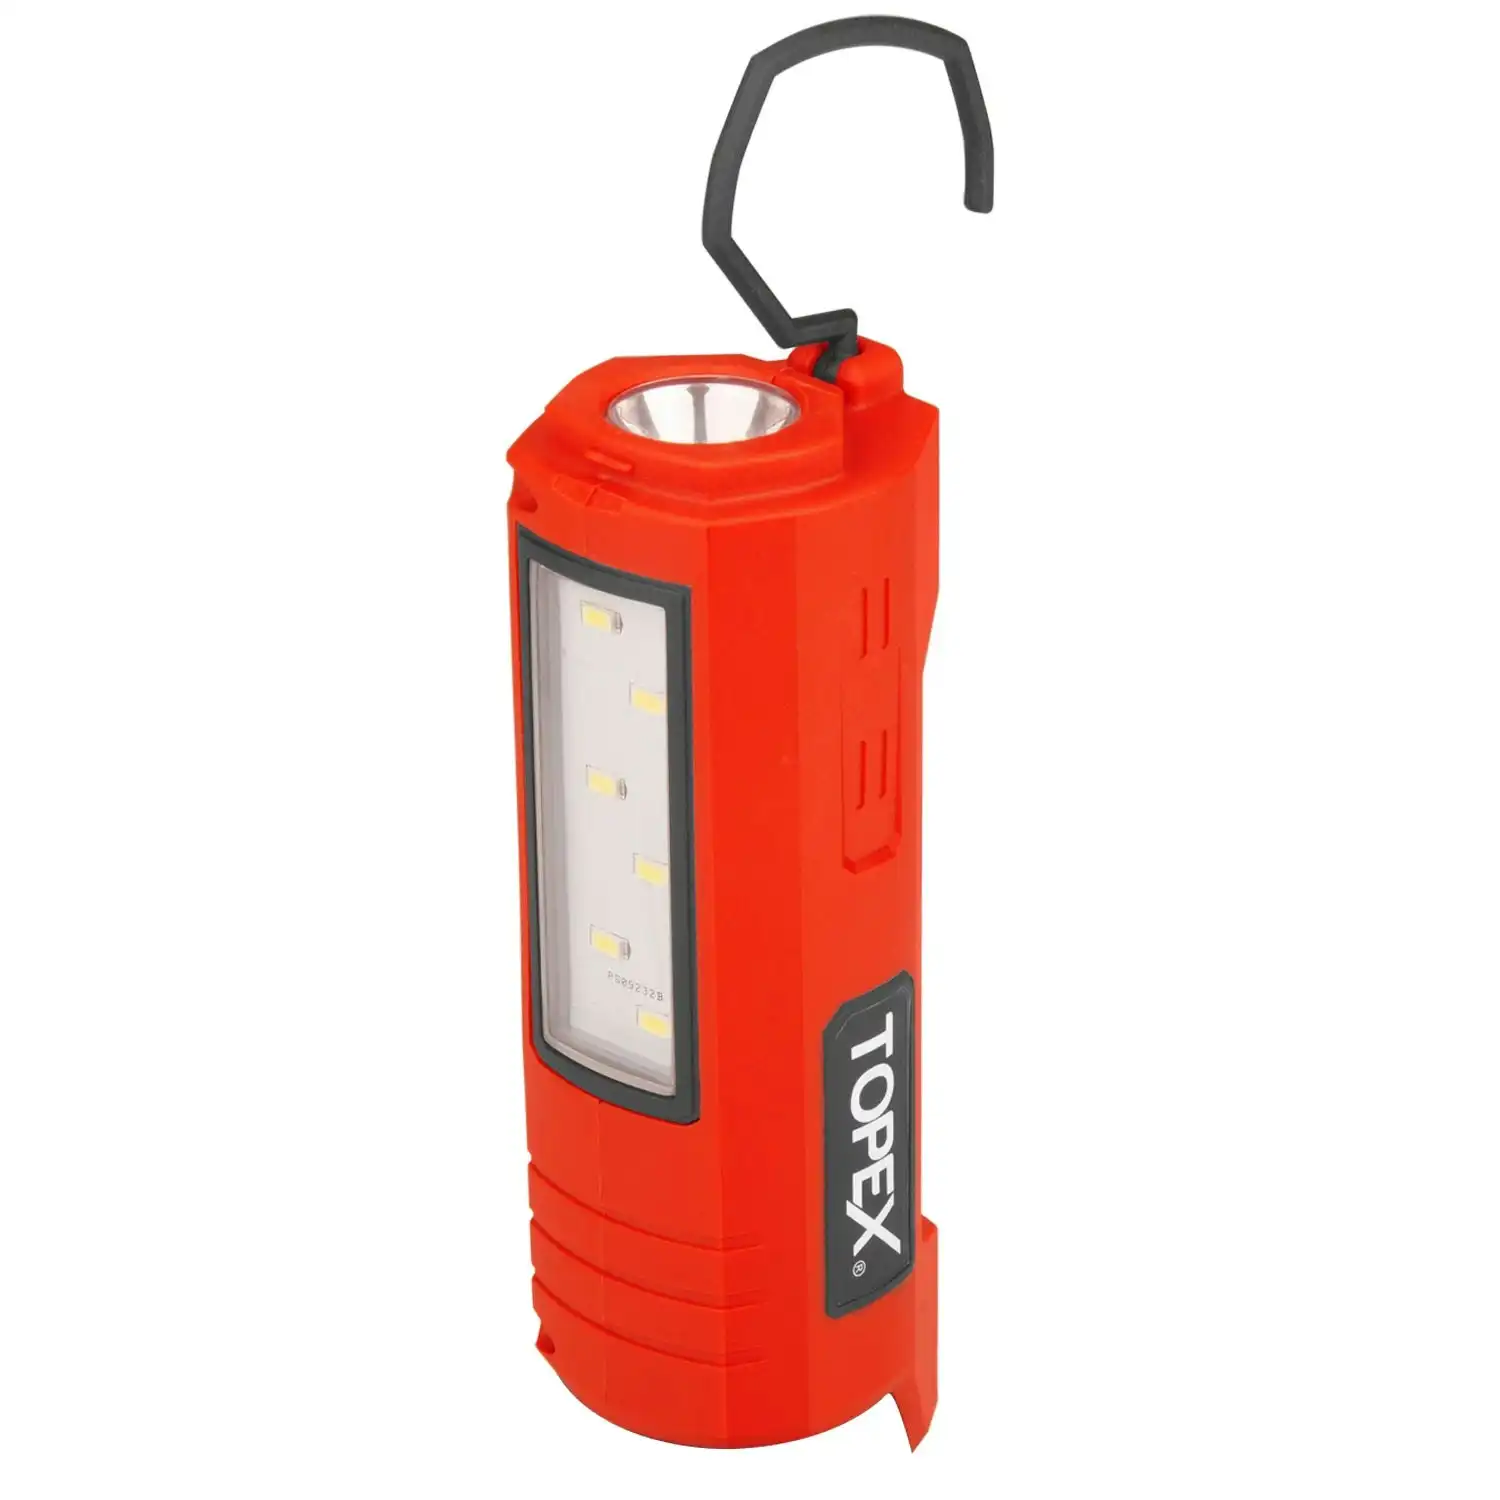 Topex 12V Cordless LED Worklight Lithium-Ion LED Torch Skin Only without Battery